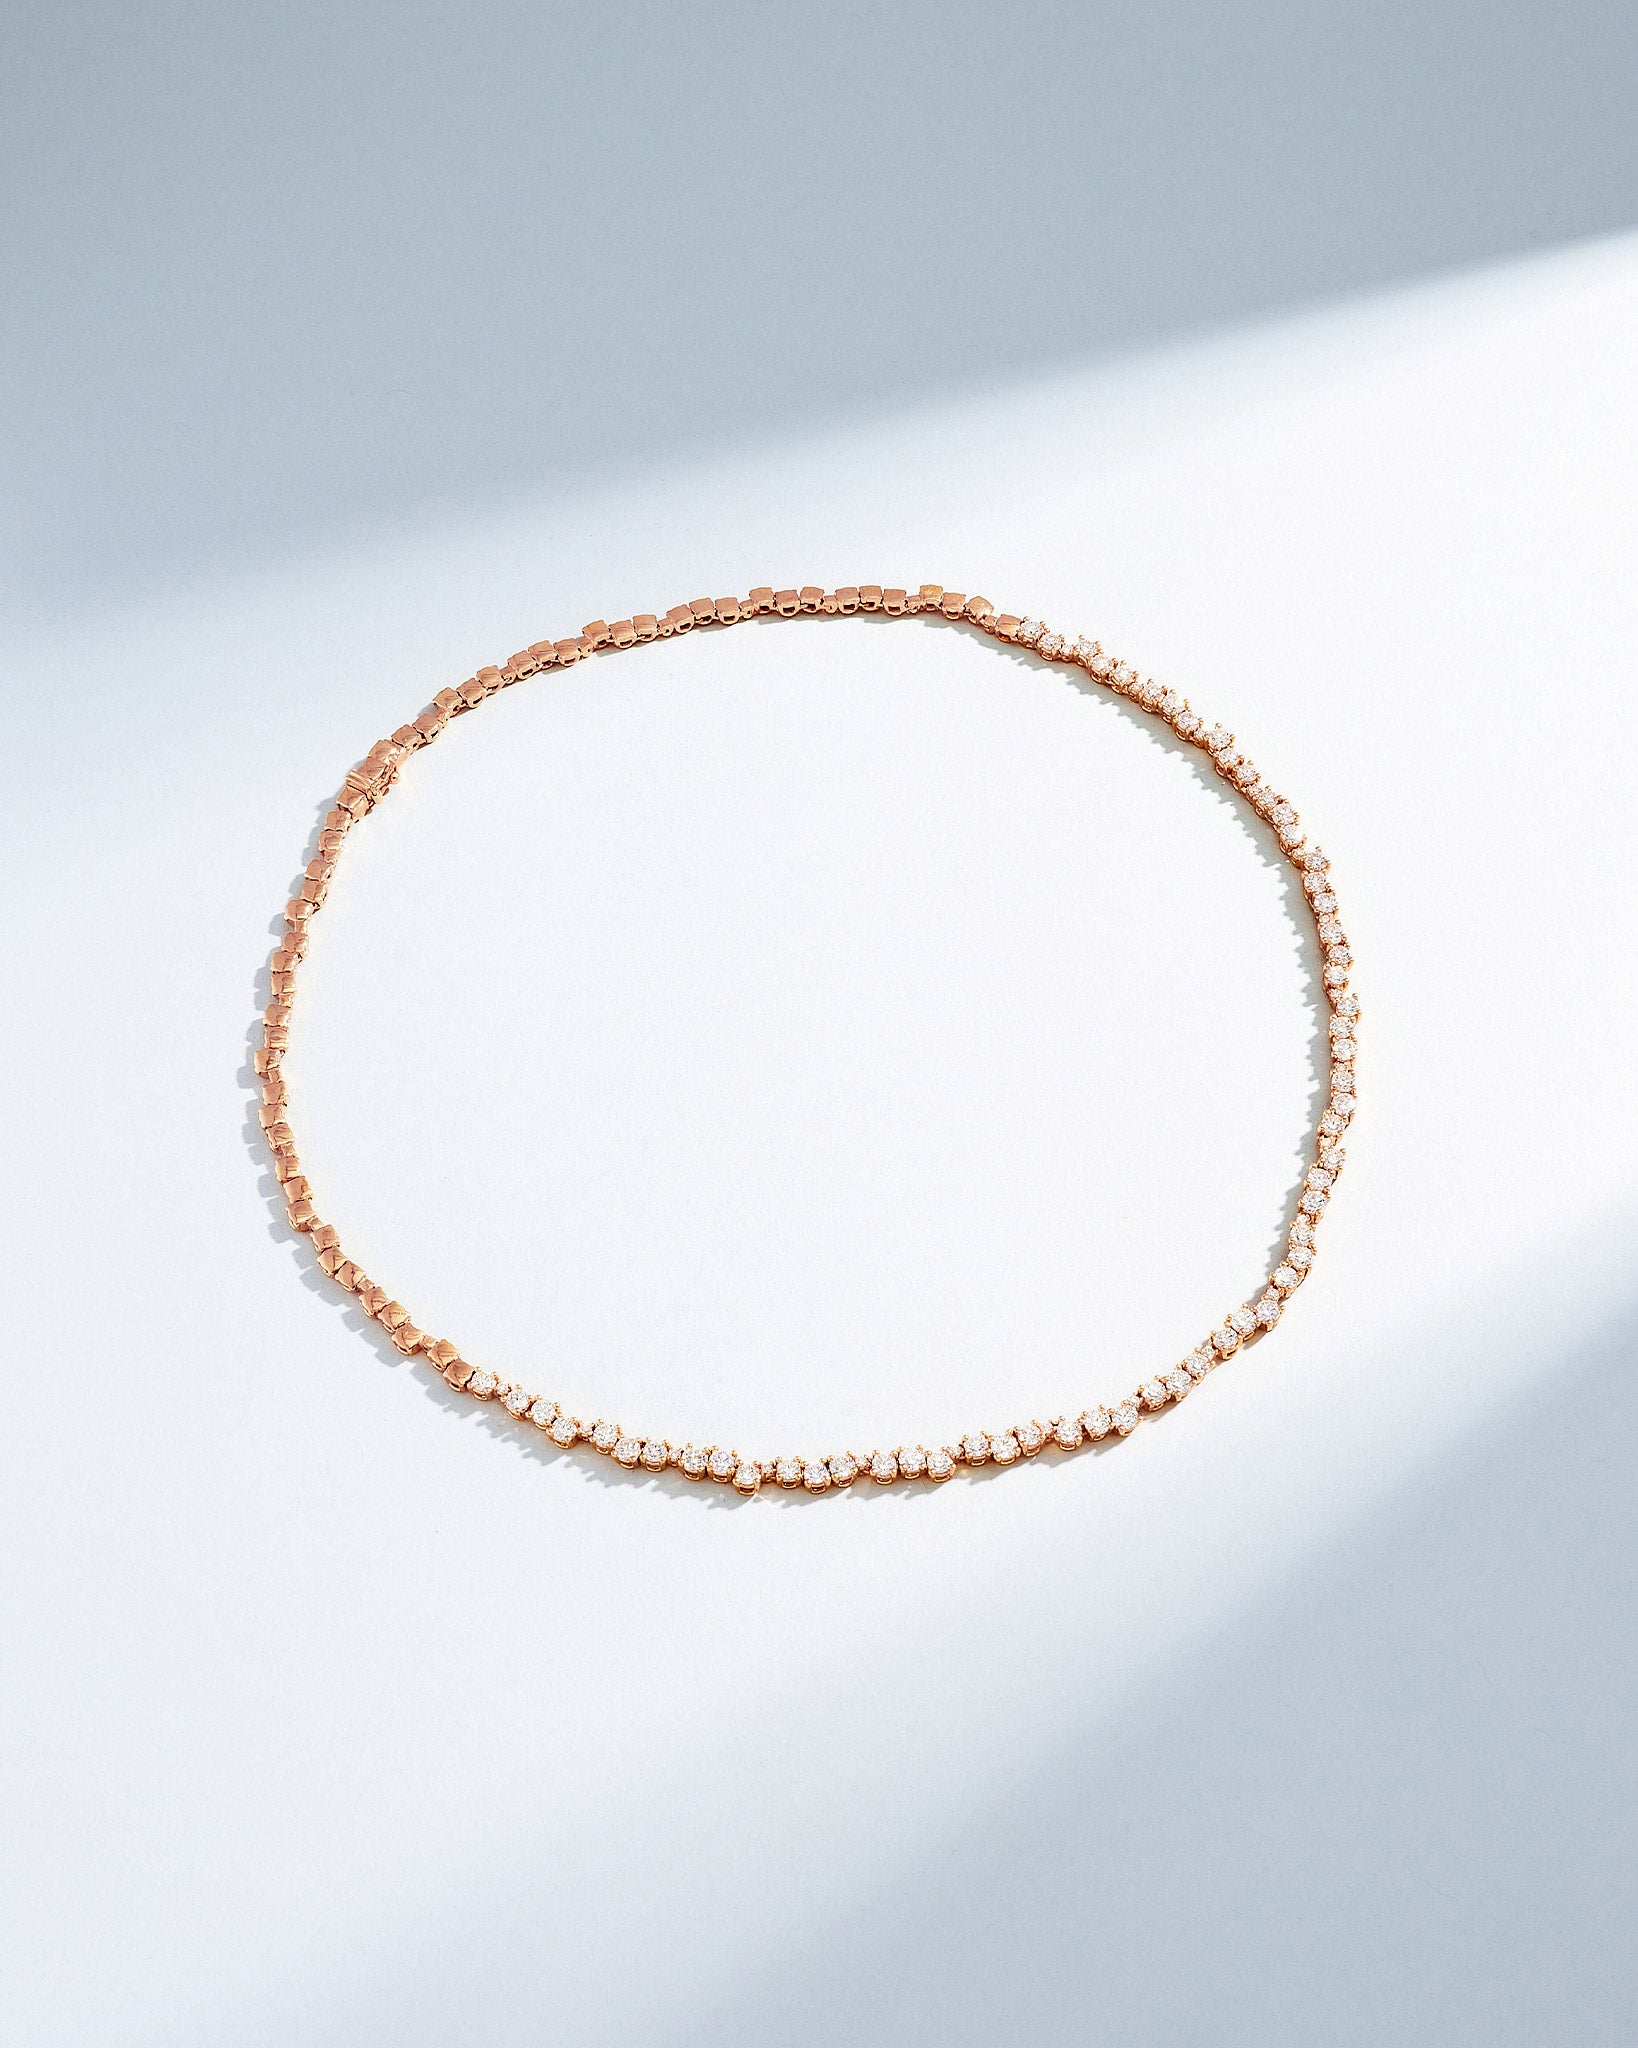 Suzanne Kalan Classic Diamond Round Tennis Necklace in 18k rose gold